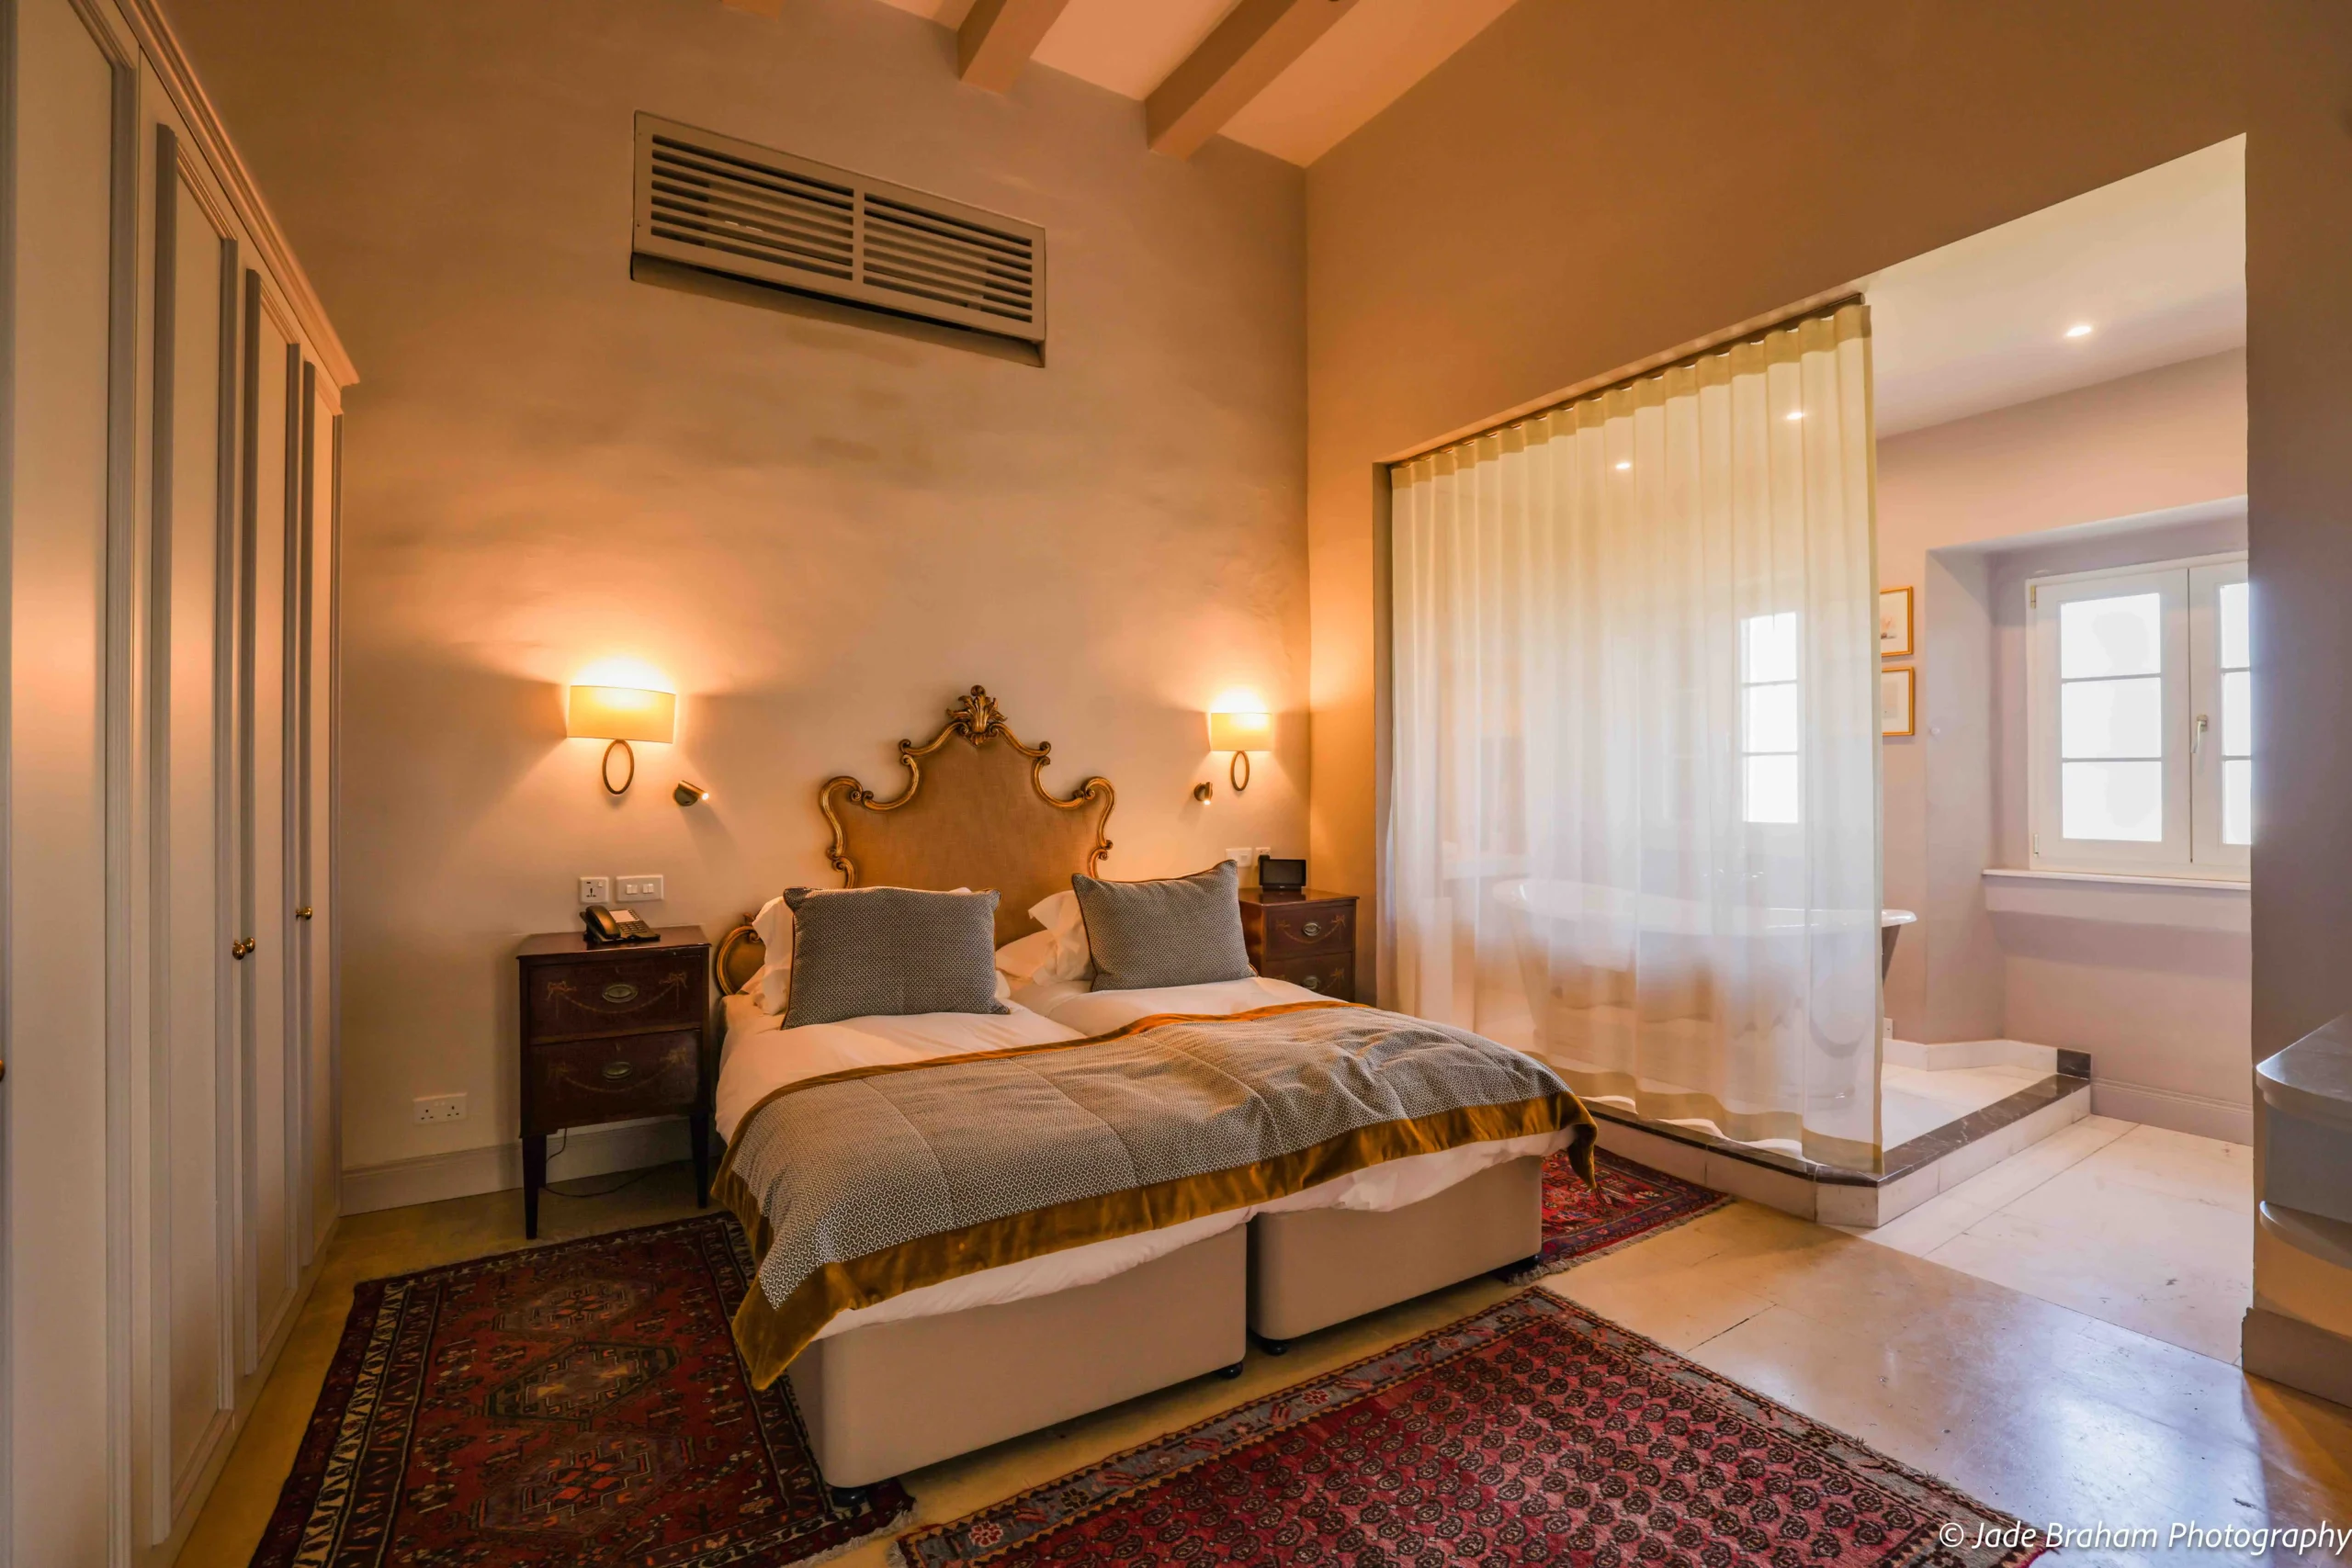 Deluxe Suite with Panoramic View at The Xara Palace in Mdina. This is one of the best hotels in Malta.